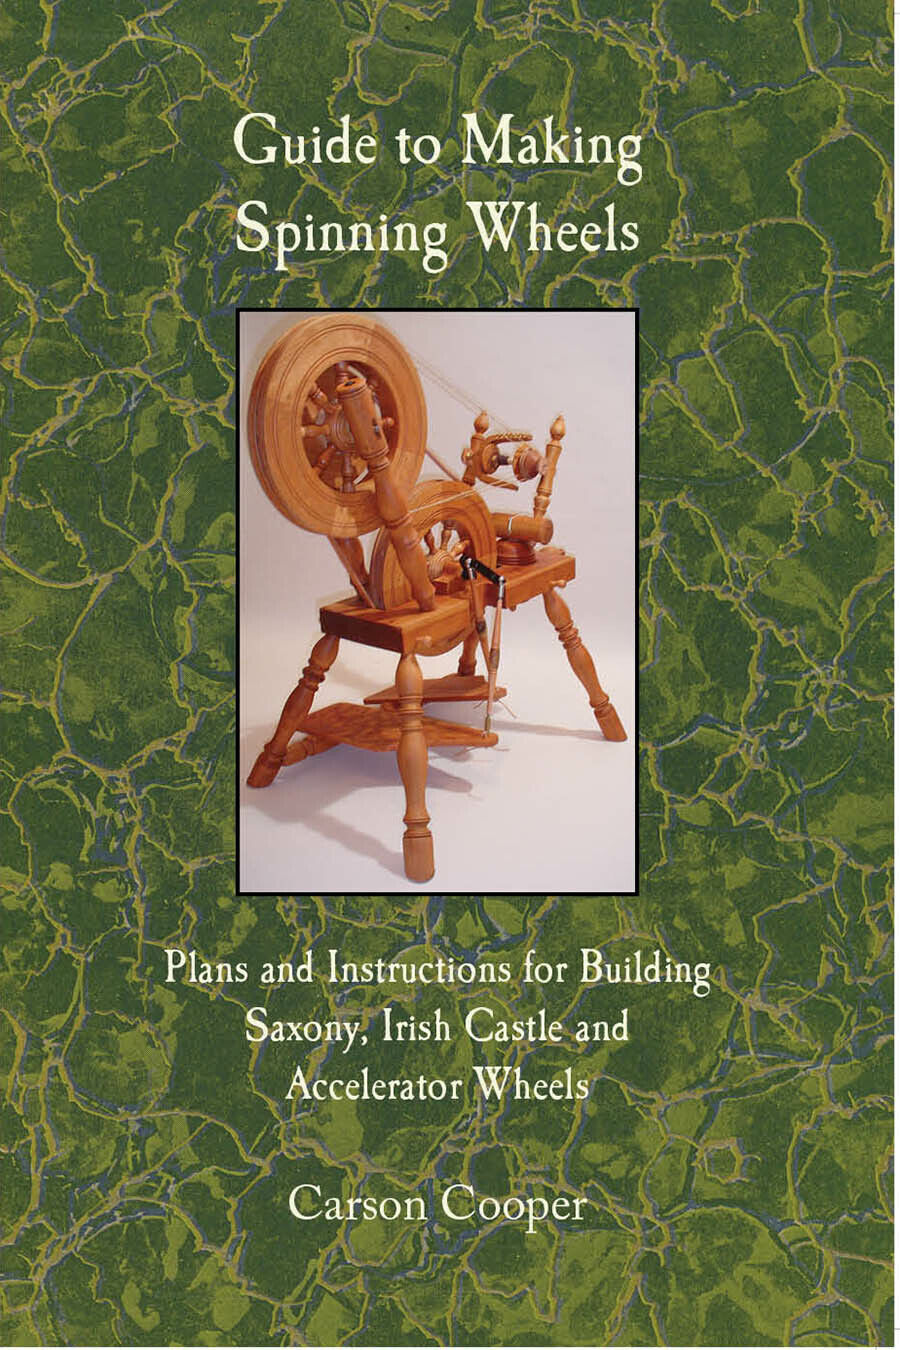 Book Guide To Making Spinning Wheels, Saxony, Irish Castle, & Accelerator Wheels